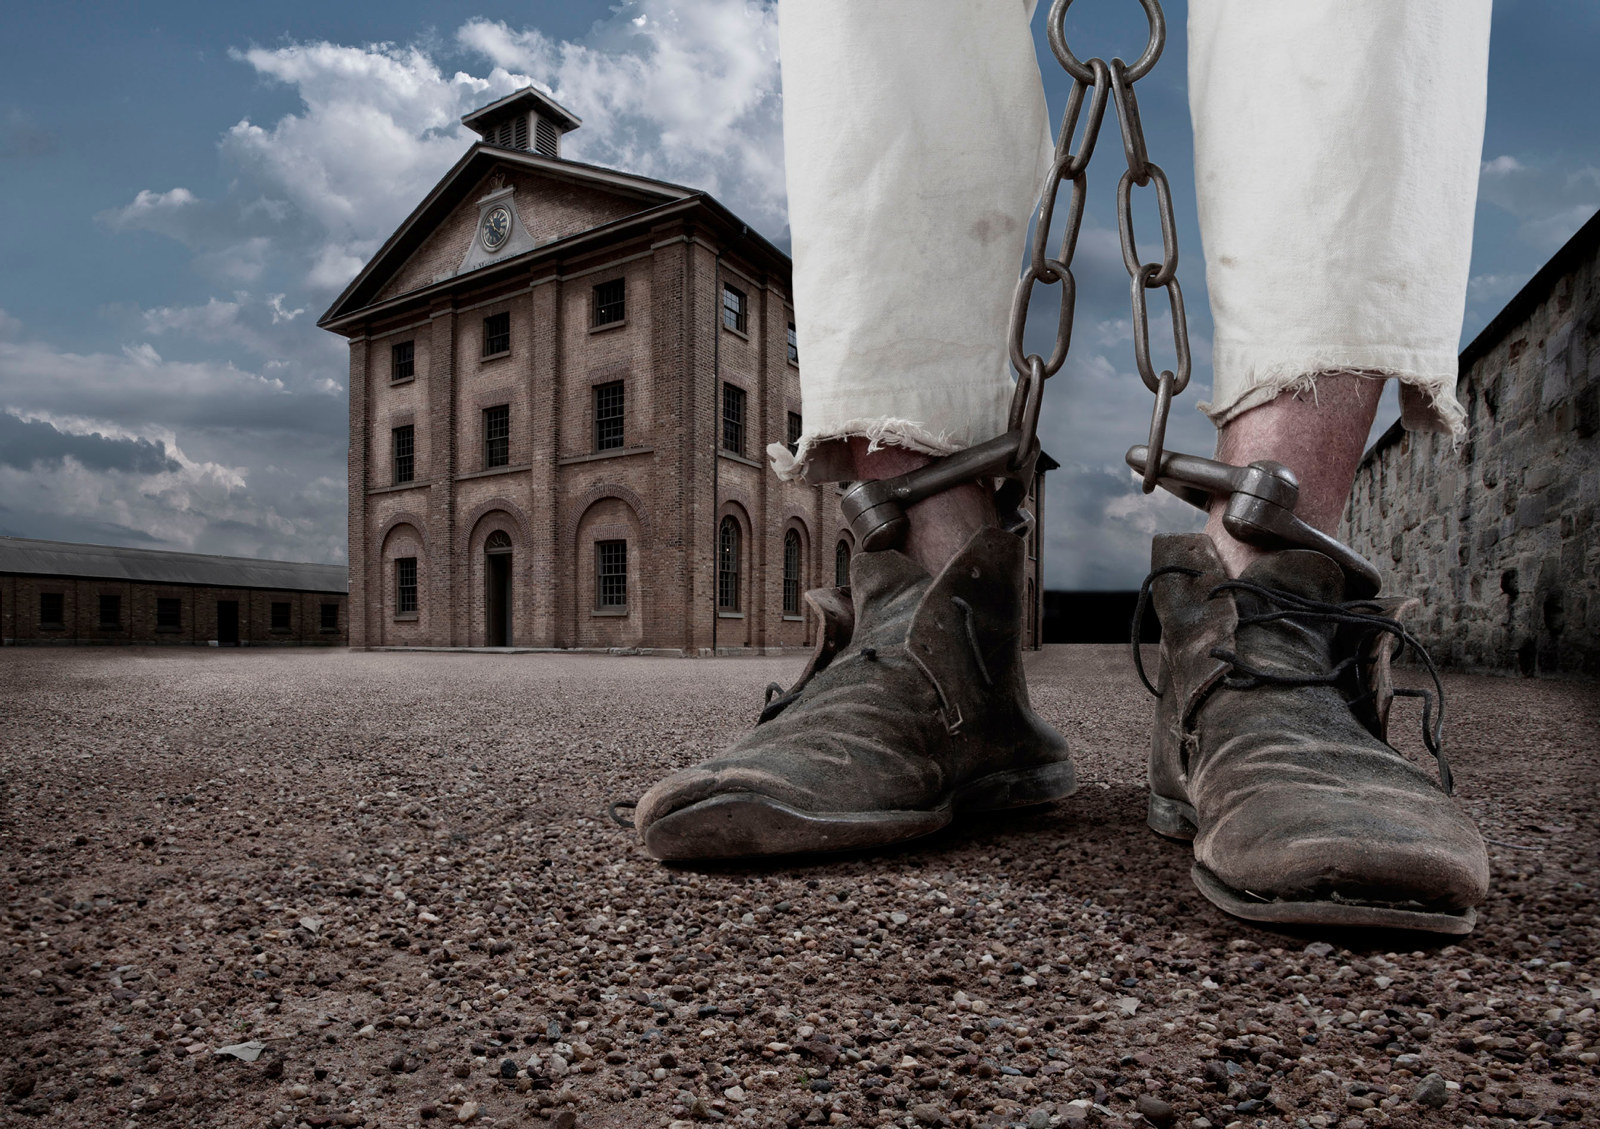 Image of chained legs (boots and white trousers visible) with Hyde Park Barracks in background.